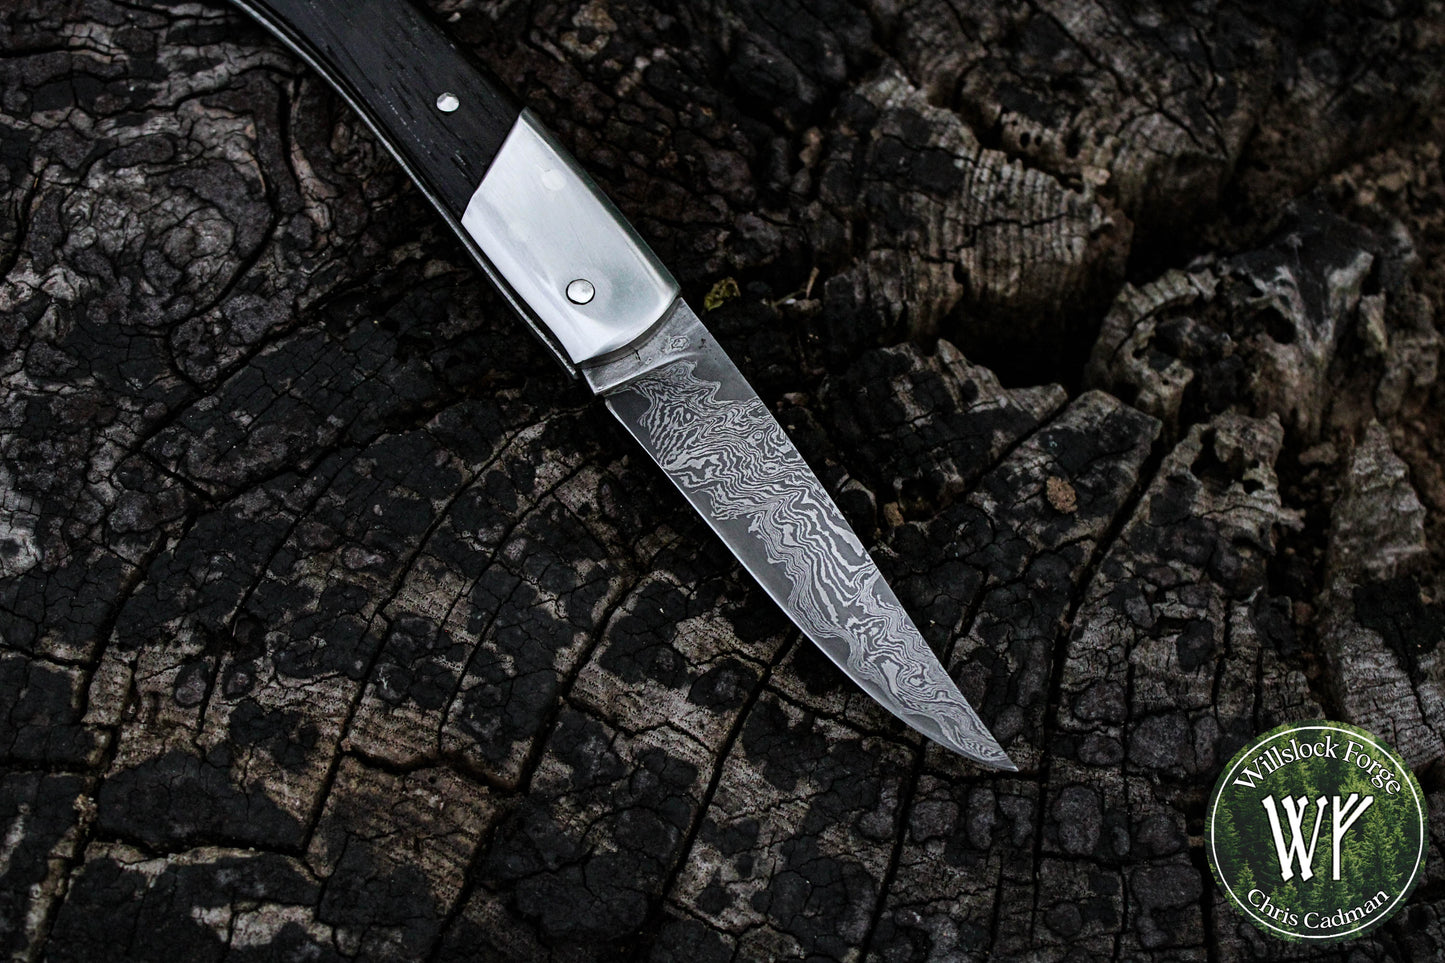 Hand-forged Pattern-welded Slipjoint / Damascus Go-Mai Blade with Ancient Bog Oak scales / UK Legal Carry